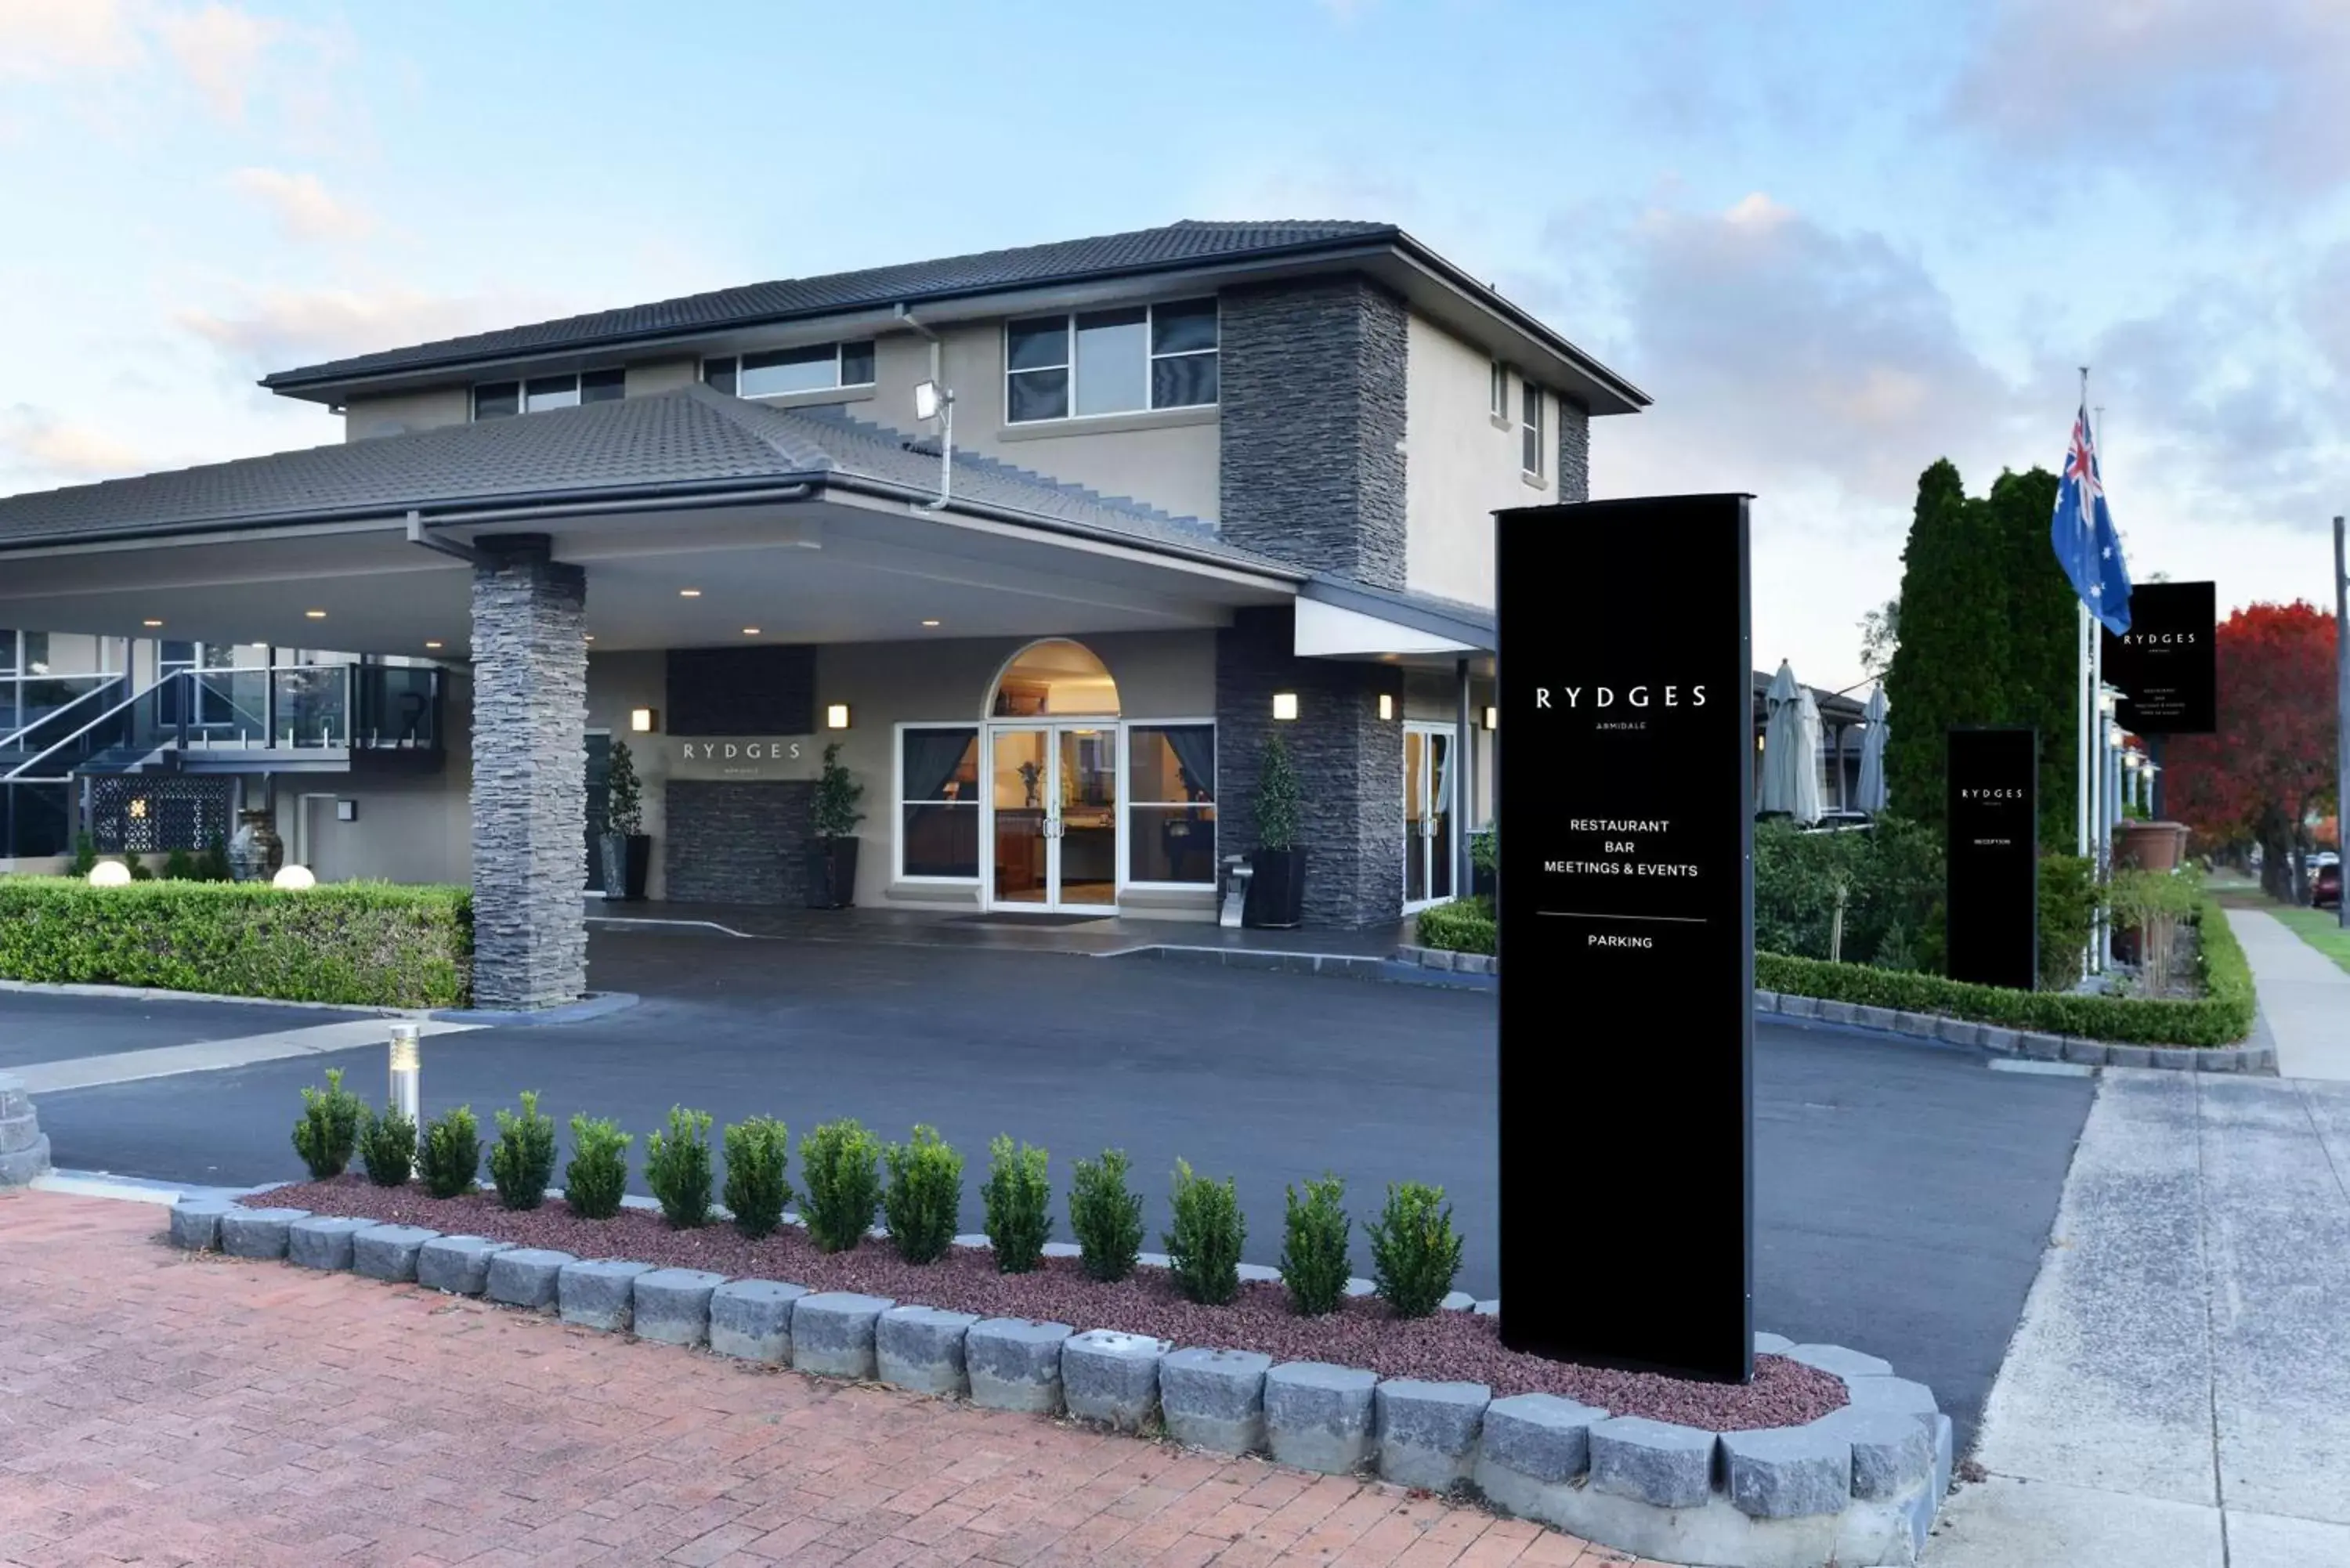 Property Building in Rydges Armidale